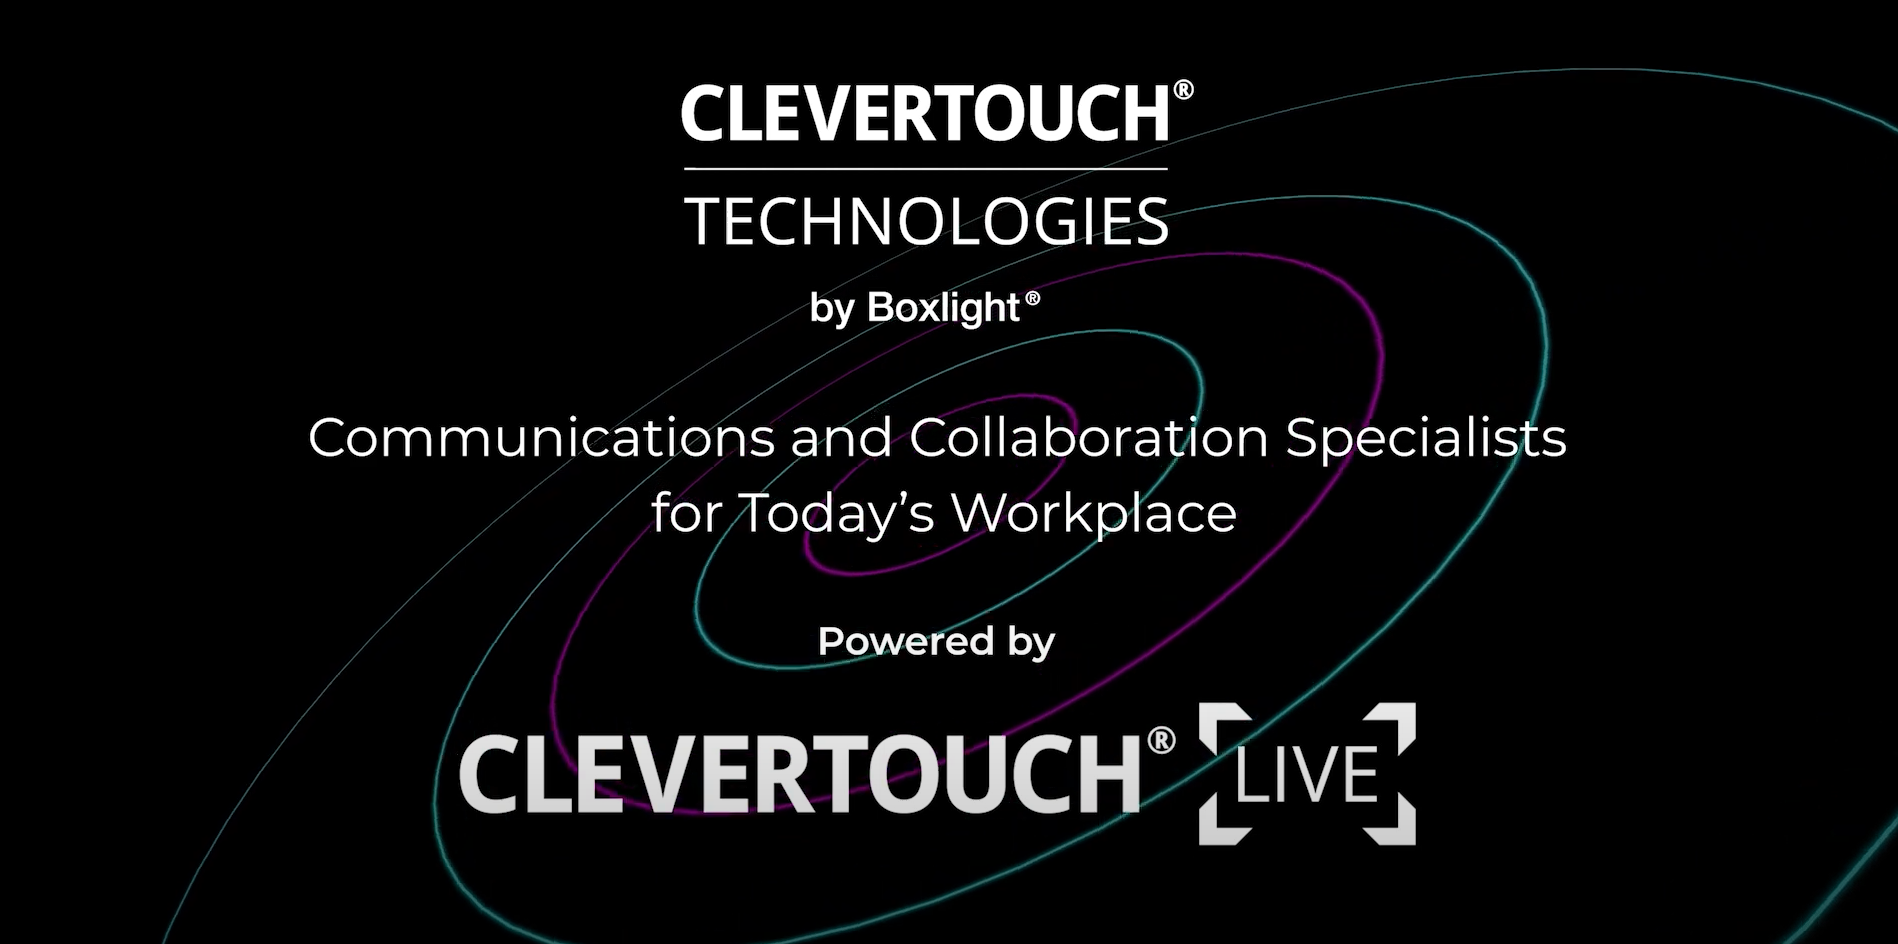 The Clevertouch Ecosystem